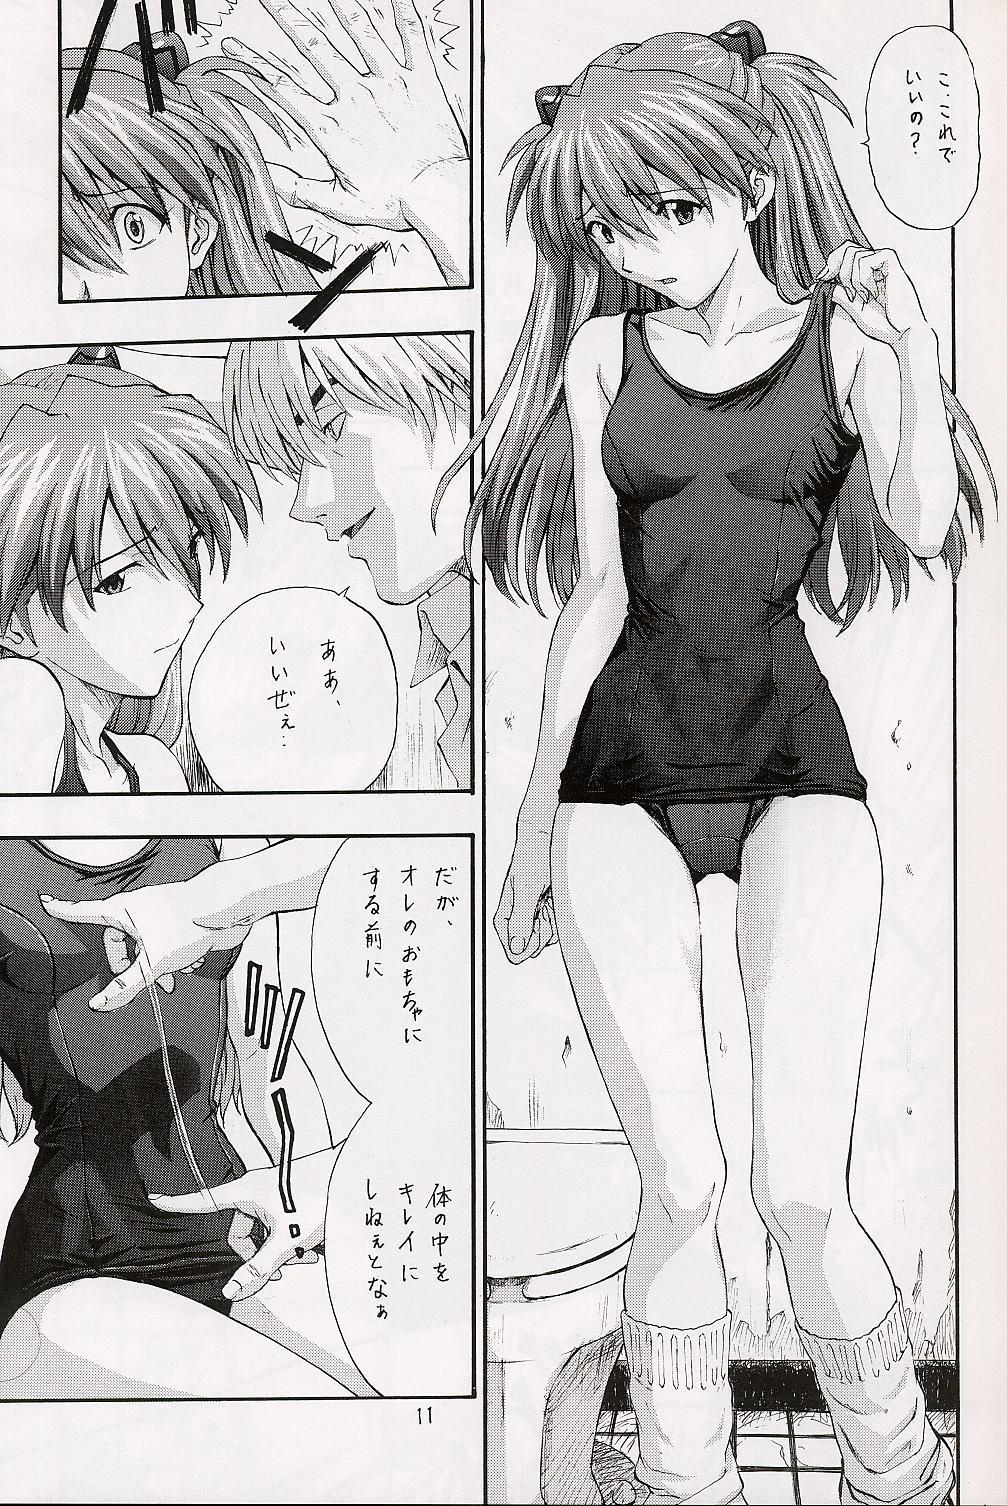 Alone A-three - Neon genesis evangelion Reversecowgirl - Page 9